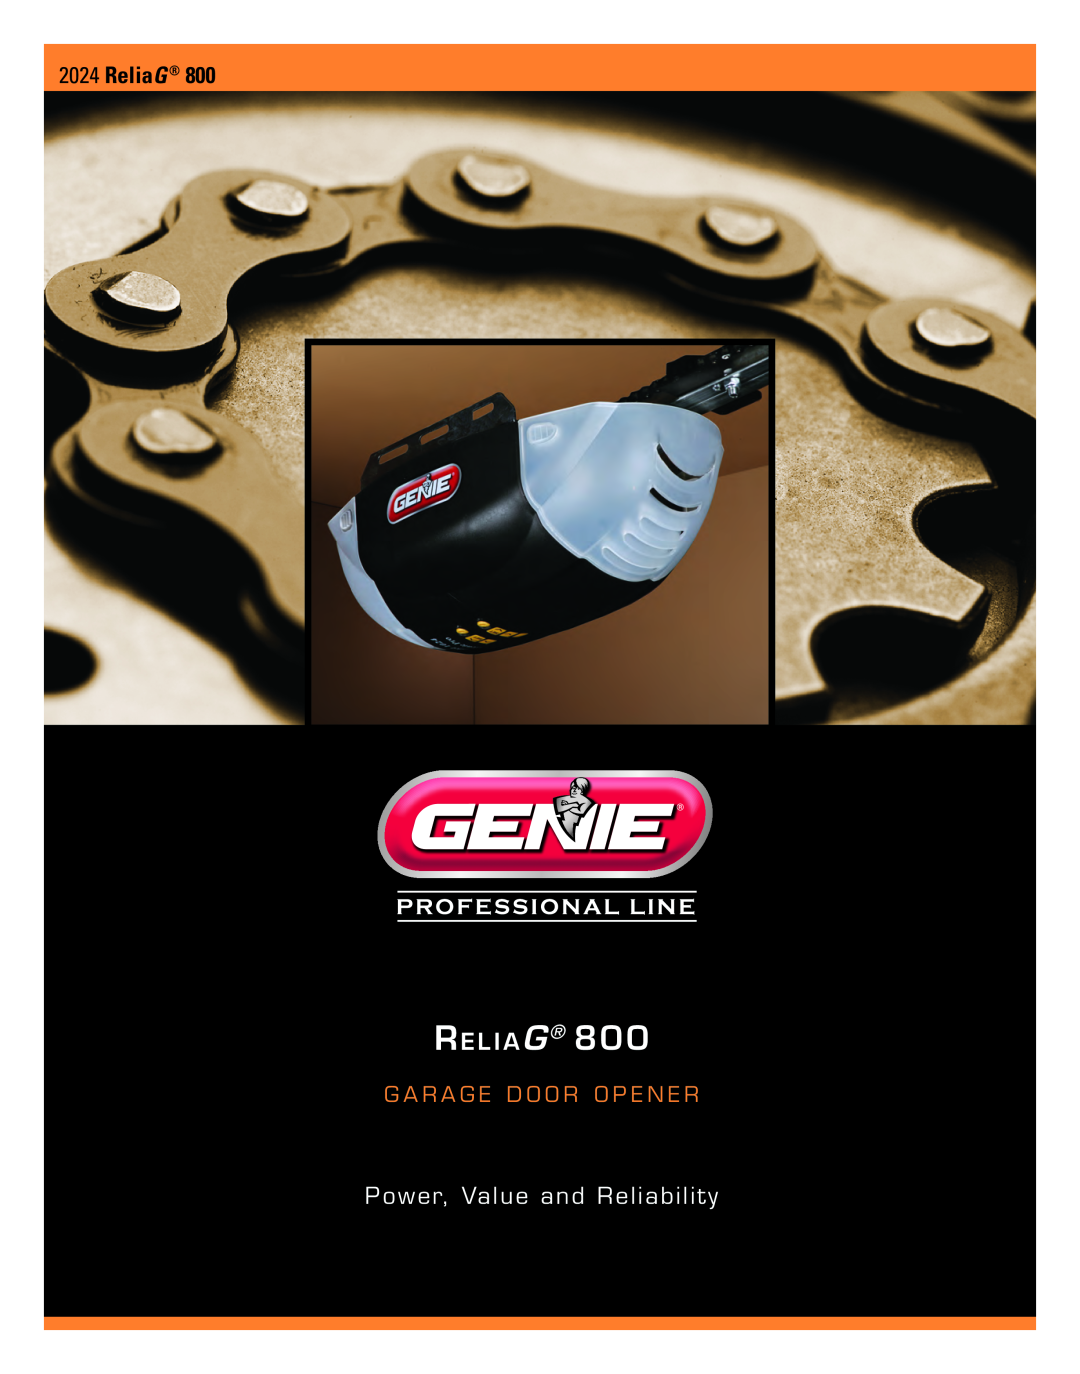 Genie 800 manual Re l i a G, Power, Value and Reliability, ReliaG, G A R A G E D O O R O P E N E R 